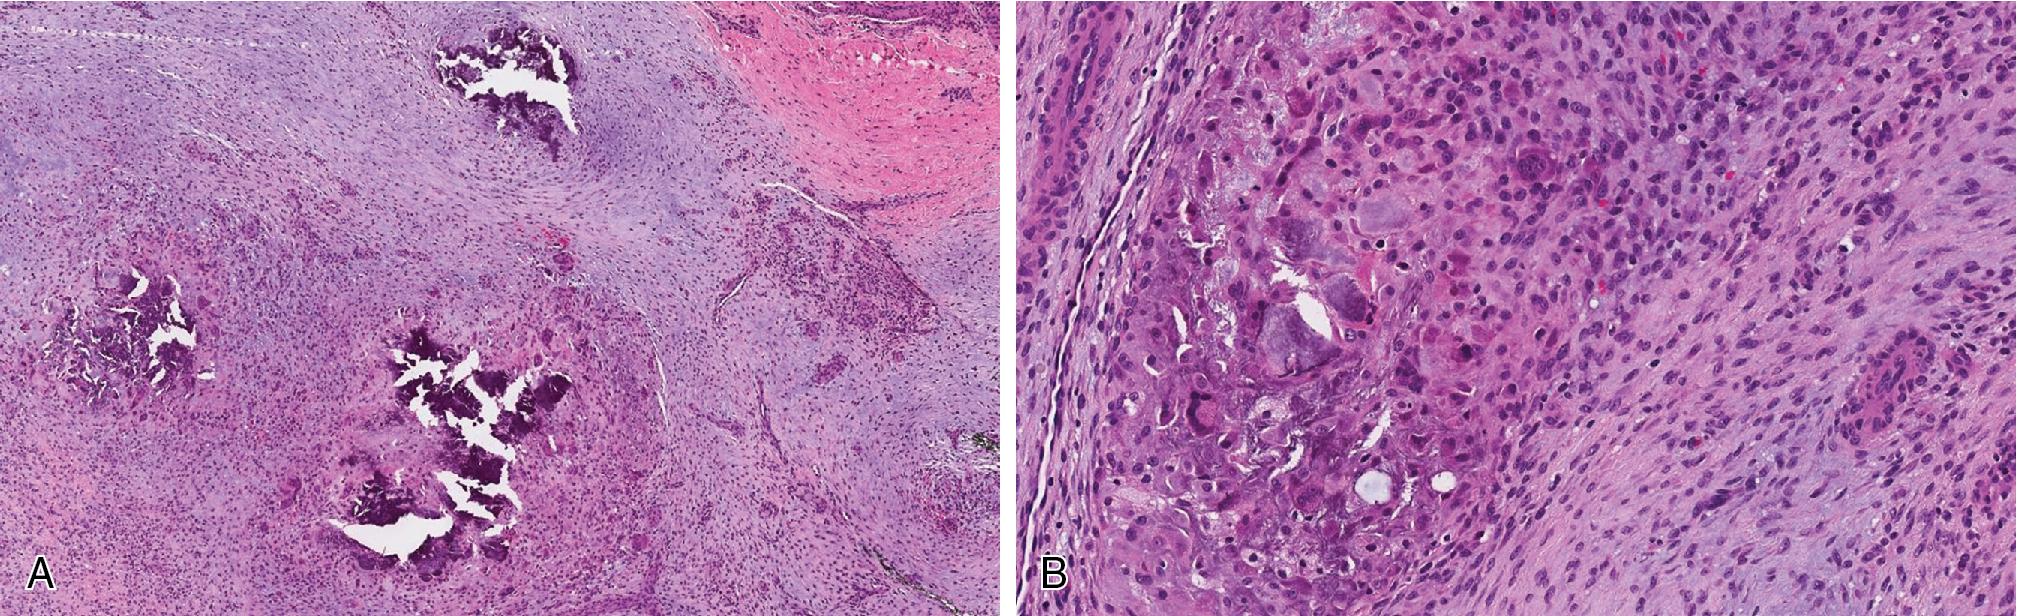 Fig. 8.18, Calcifying aponeurotic fibroma has infiltrative fibromatosis–like spindled cell areas admixed with less cellular areas of plump epithelioid fibroblasts with zones of calcification ( A, low power; B, high power).